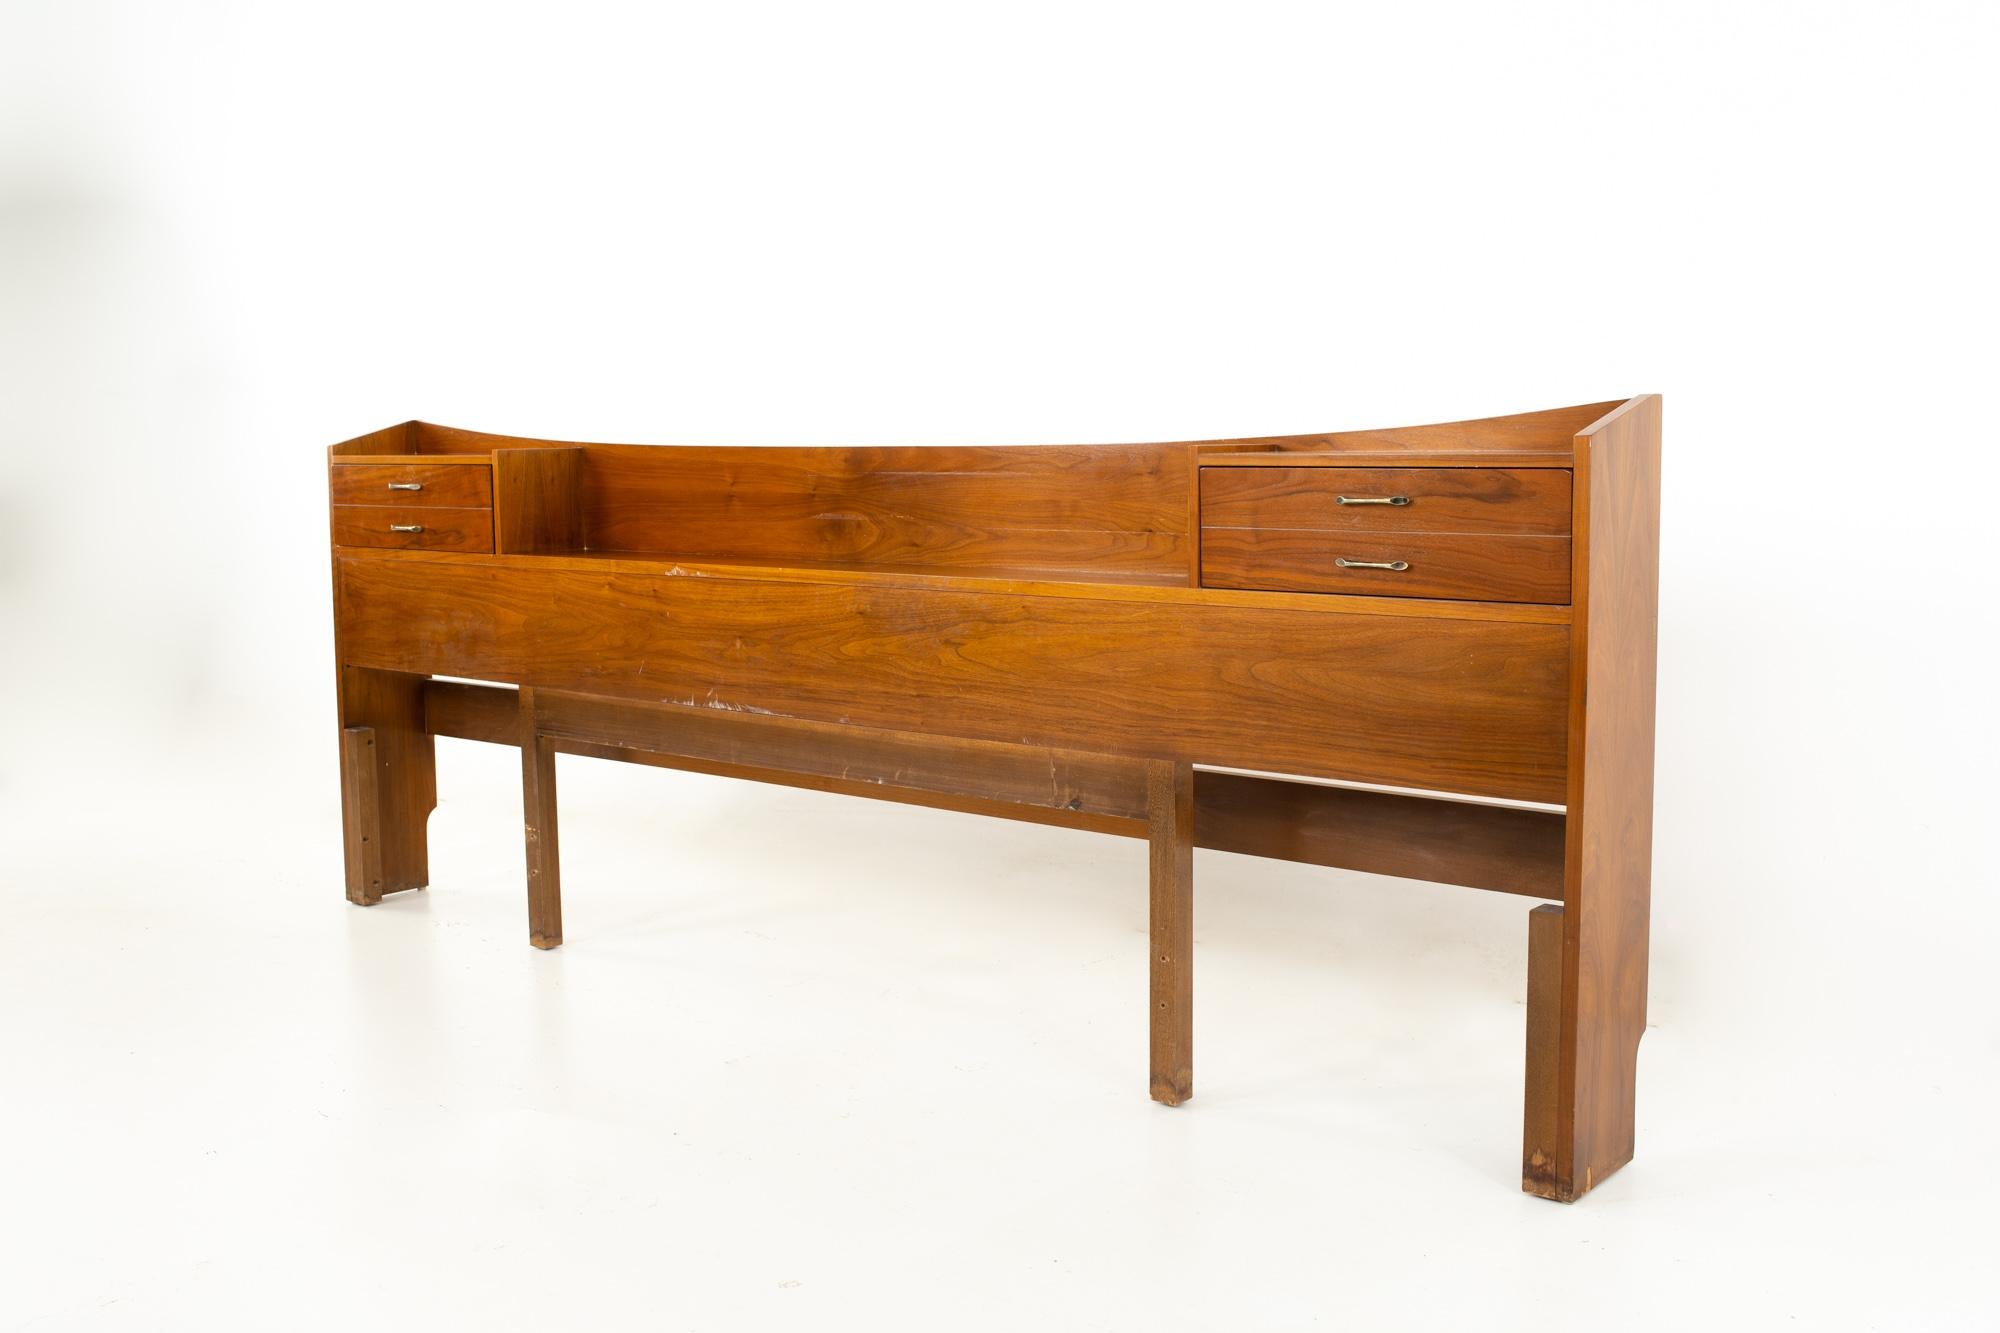 Young Manufacturing mid century walnut king headboard and nightstands
Headboard measures: 97 wide x 8 deep x 36.25 inches high

All pieces of furniture can be had in what we call restored vintage condition. That means the piece is restored upon